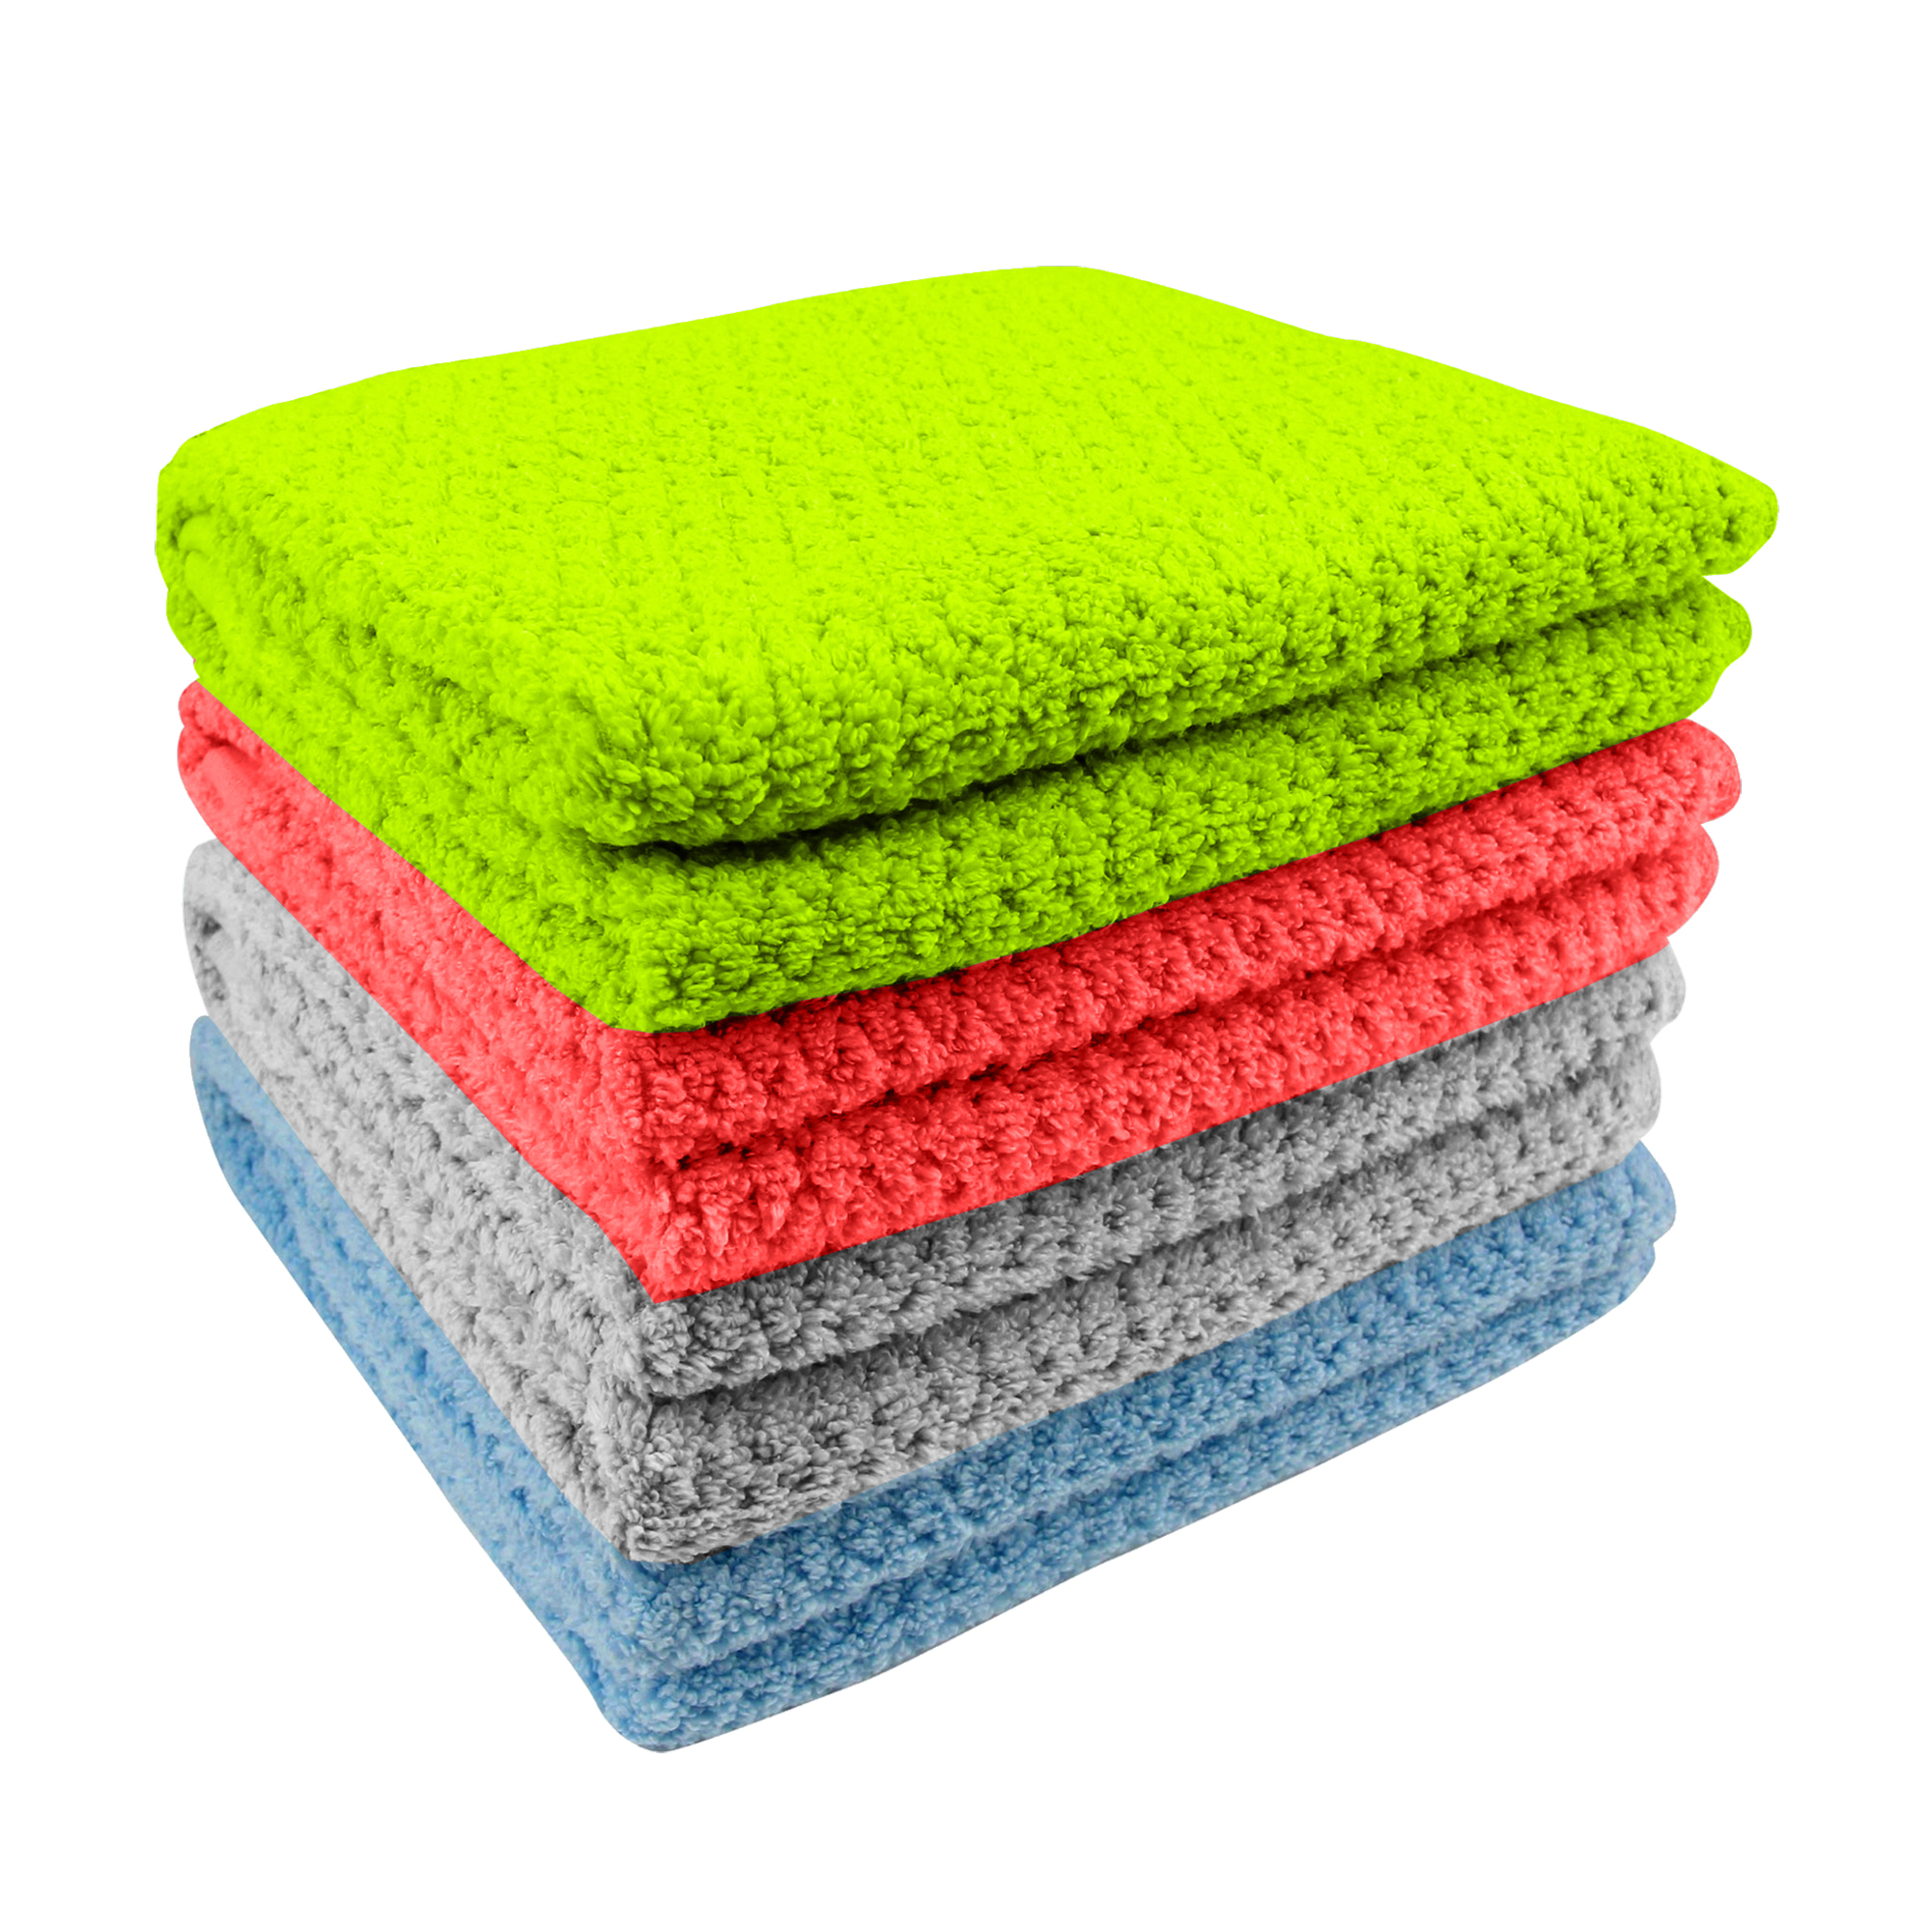 Bargain Honcho 5-Pack Ultra-Soft Popcorn Textured Weaved 100% Cotton Quick Dry Absorbent Bath Spa Towels